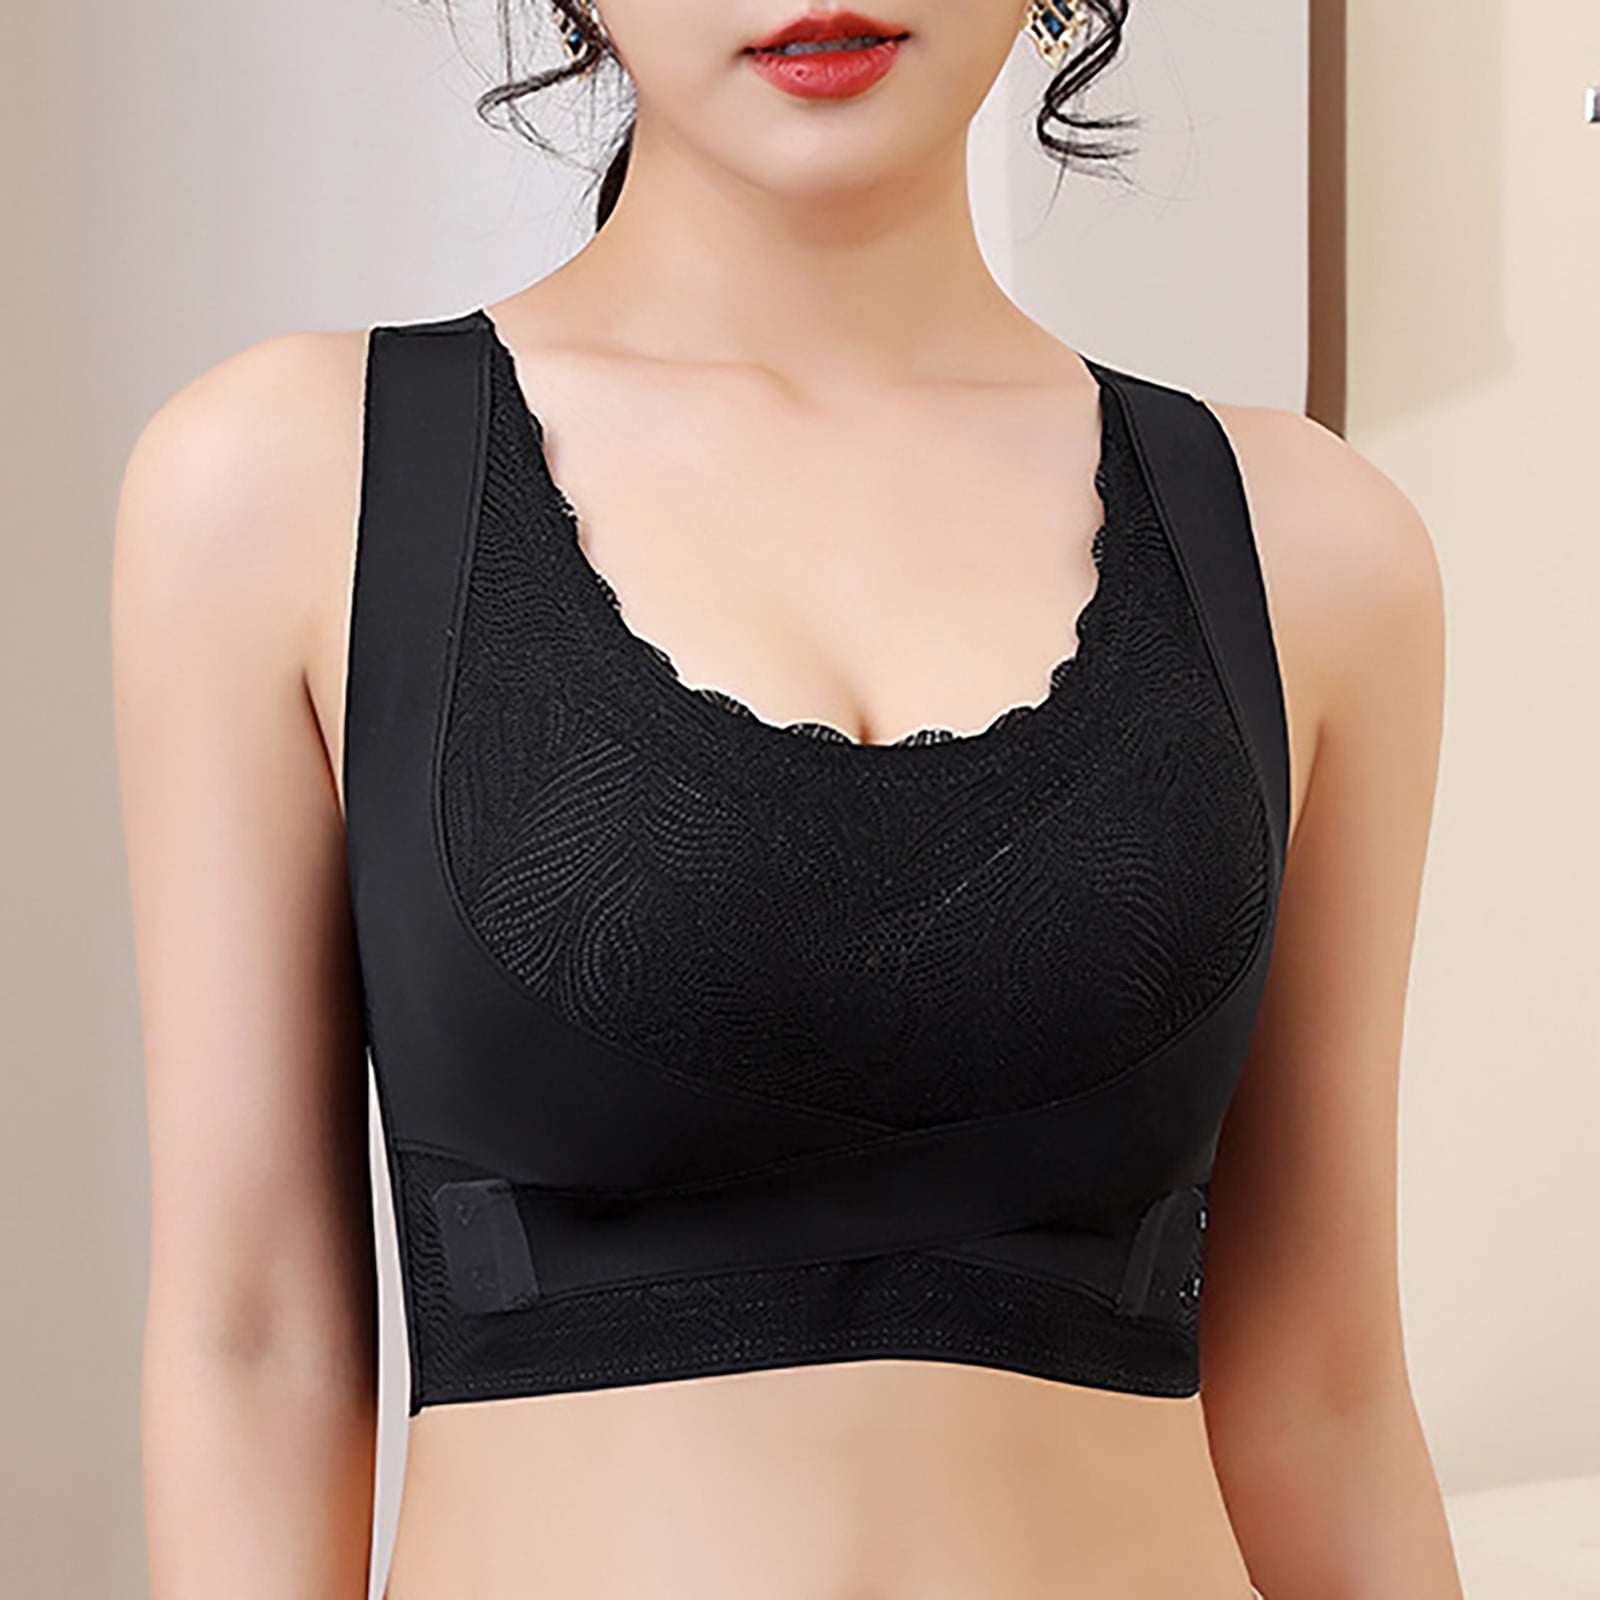 Bigersell Cotton Sports Bras for Women On Sale Cute Sports Bras for Women  Full-Figure Bra Style B3469 V-Neck Convertible Bras Hook and Eye Bra  Closure